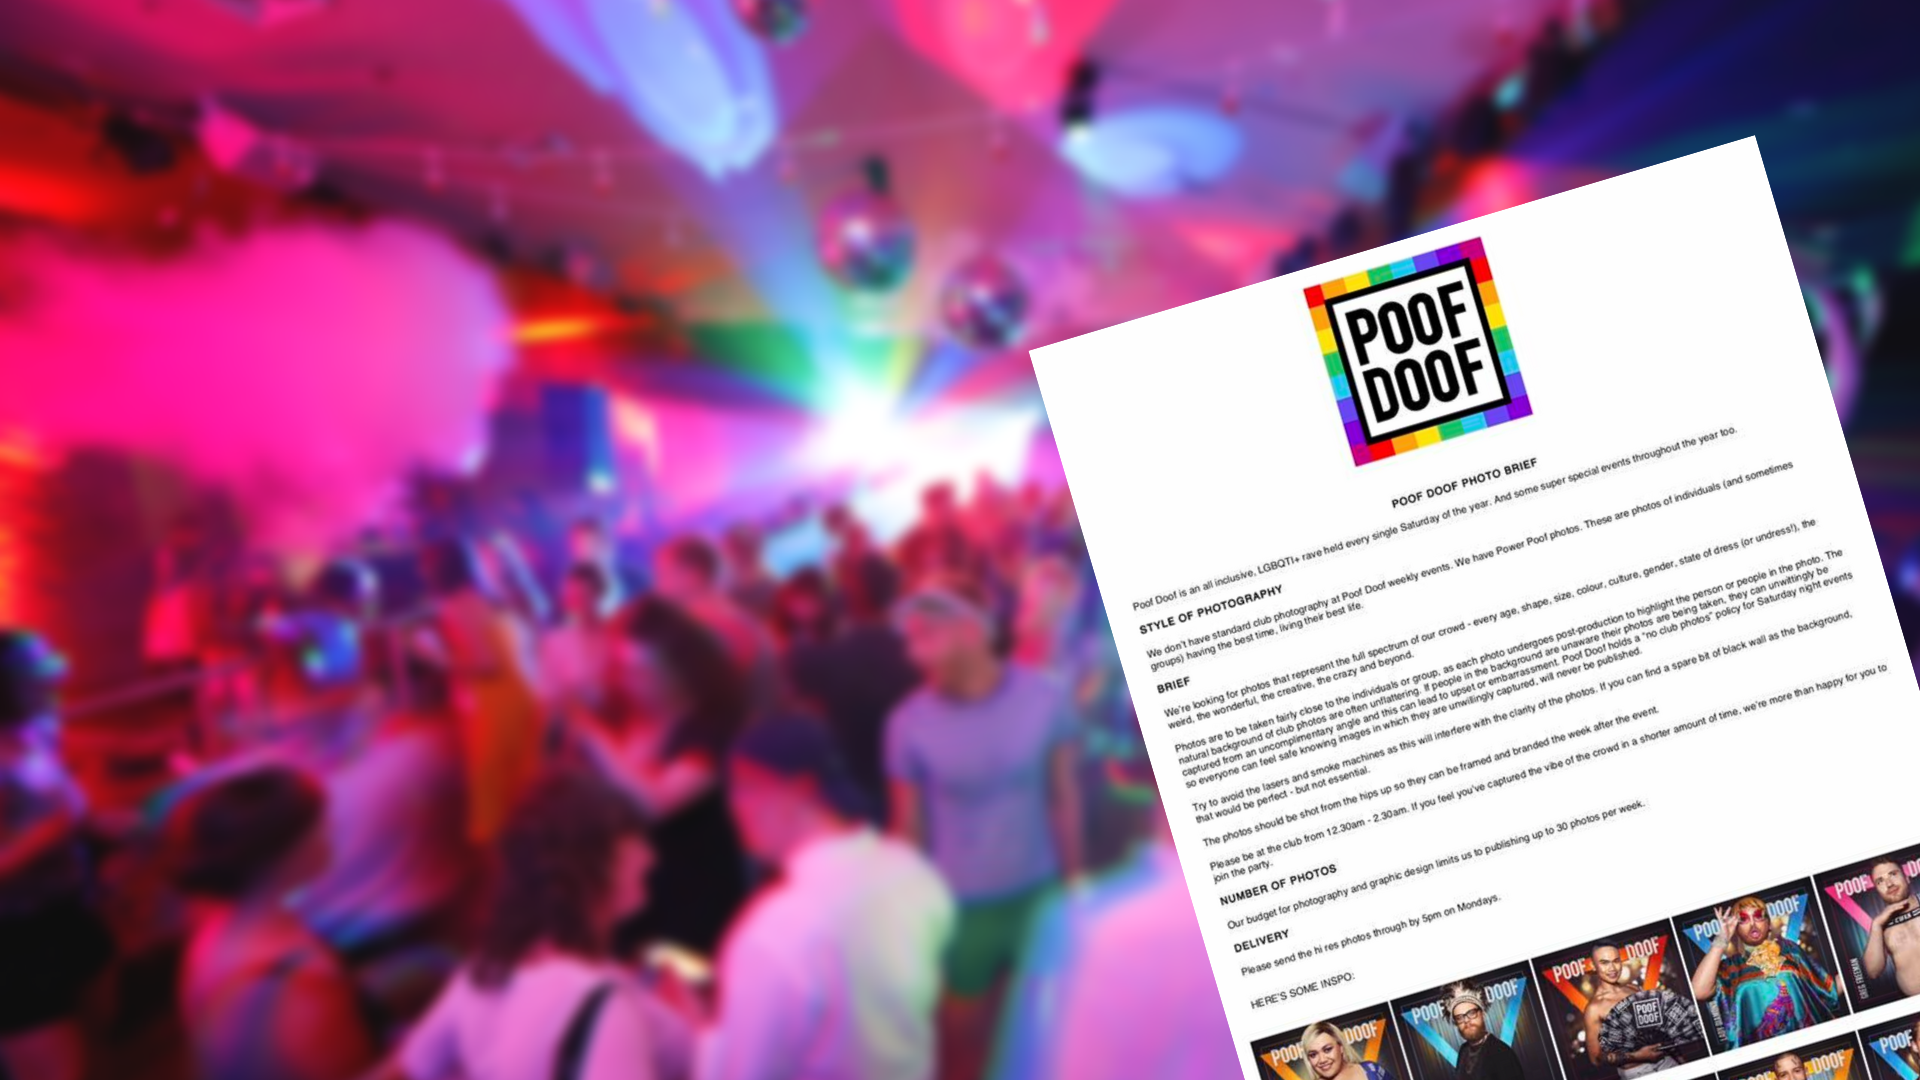 Poof Doof publishes new photo brief following LGBTI community backlash